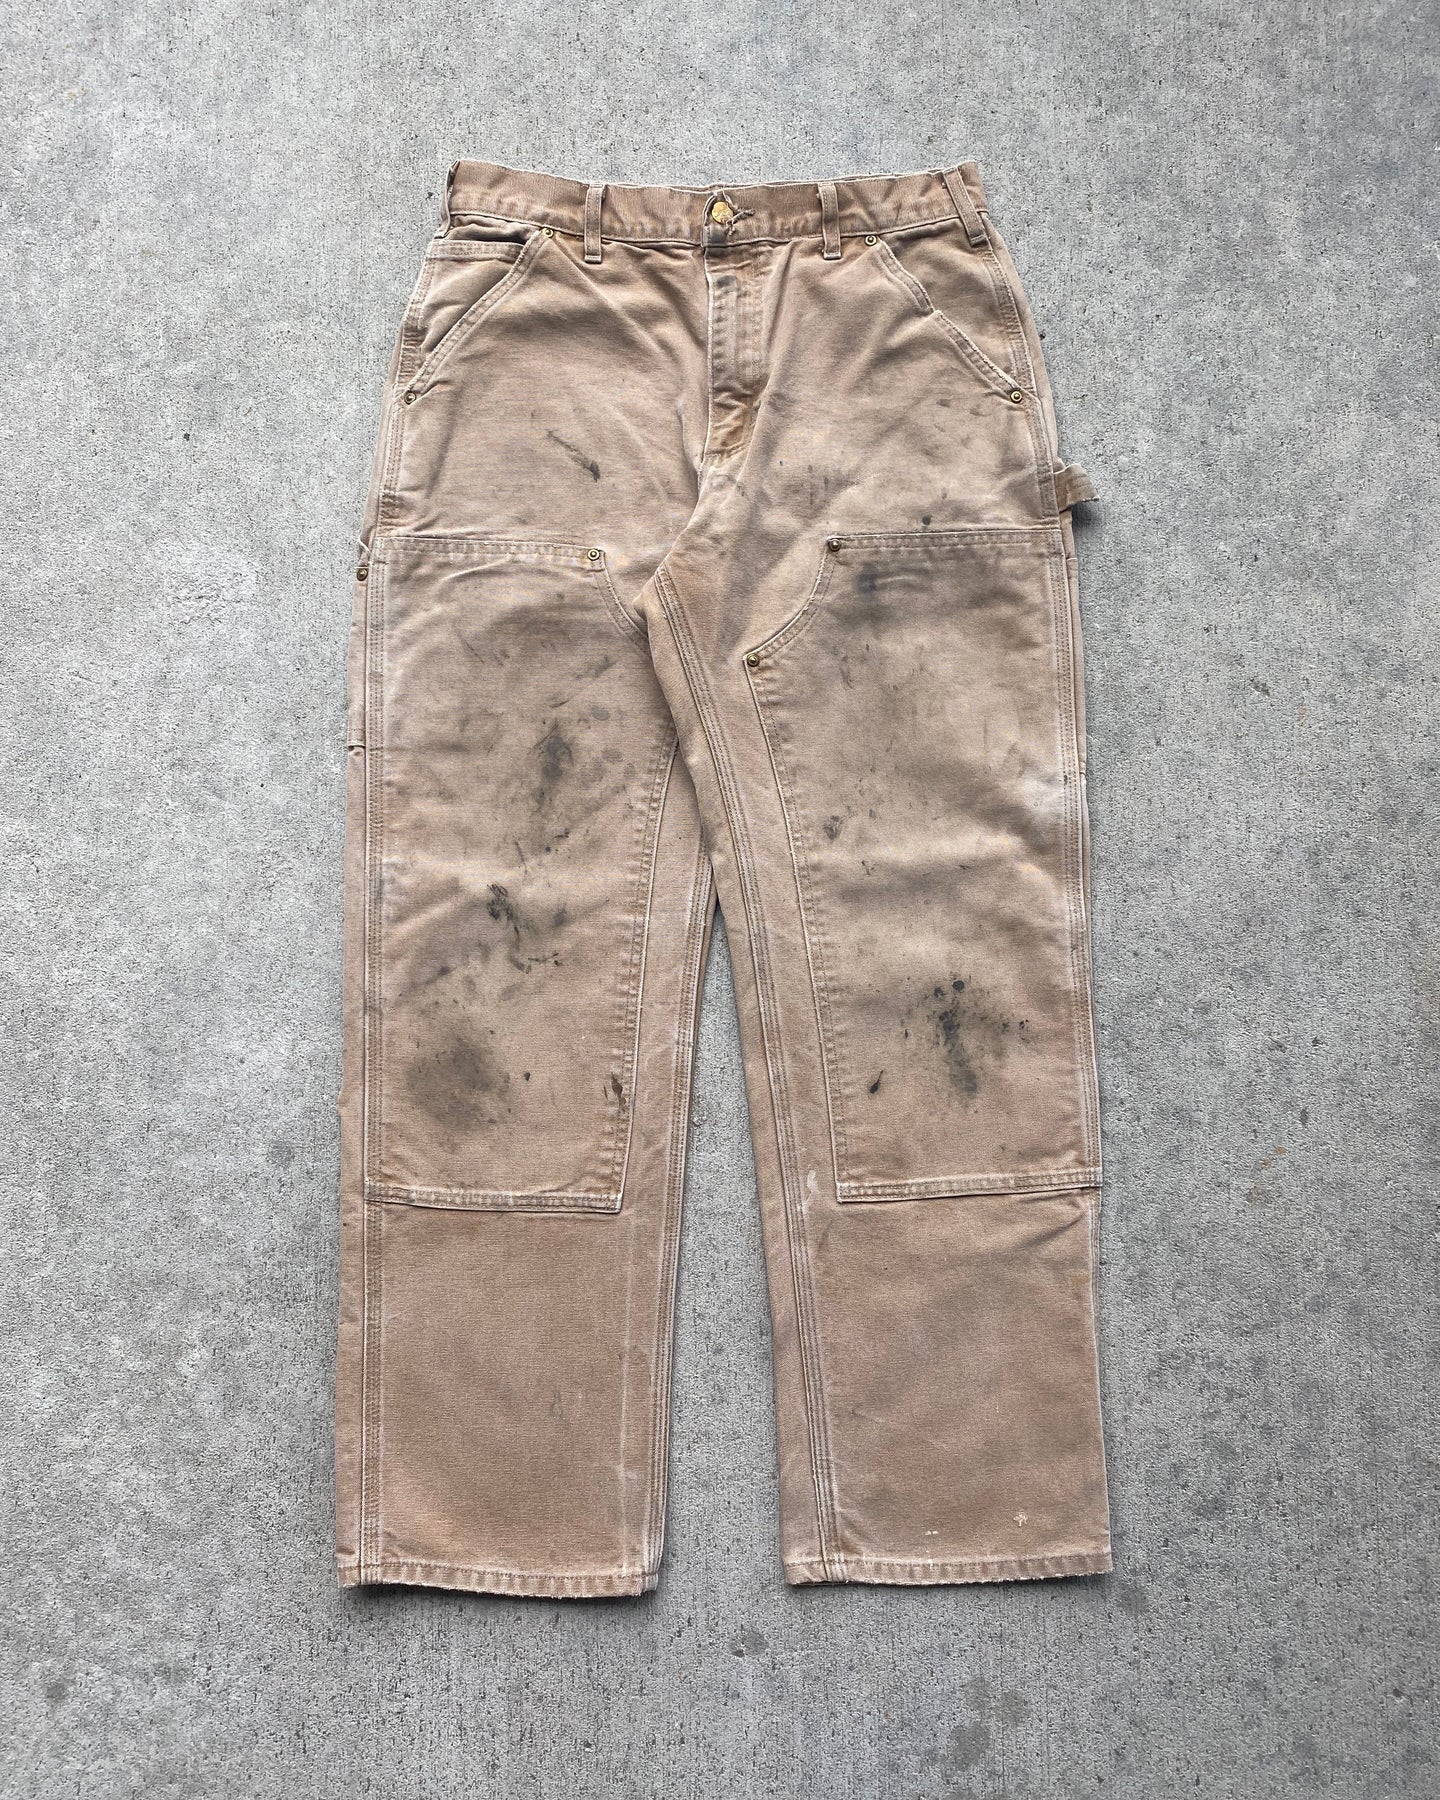 1990s Carhartt Distressed Double Knee Pants - Size 31 x 29